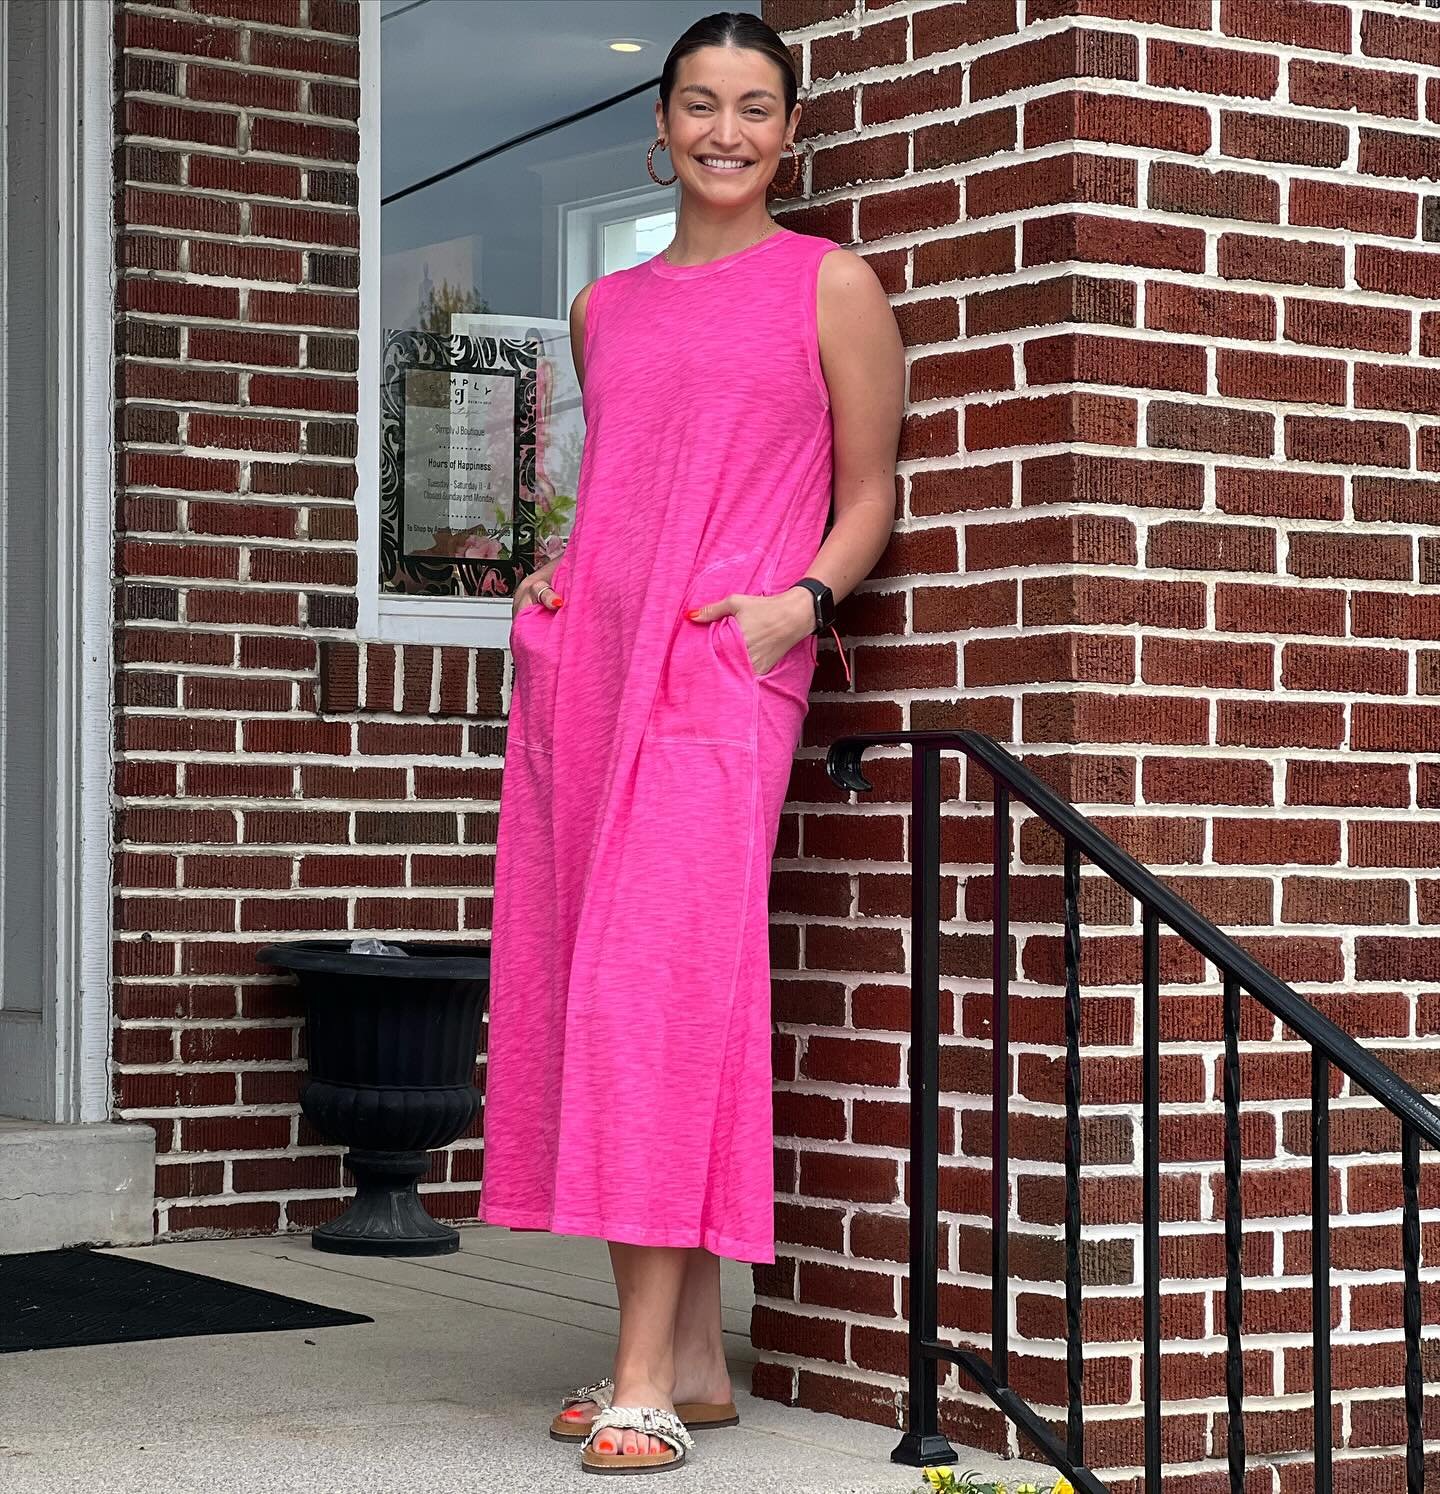 So pretty in pink! Great throw and go maxi from Lilla P! Perfect after a day on the beach or at the pool!
.
.
#shopsimplyjhershey #shoplocalcentralpa #lancasterpa #camphillpa #harrisburgpa #lillap